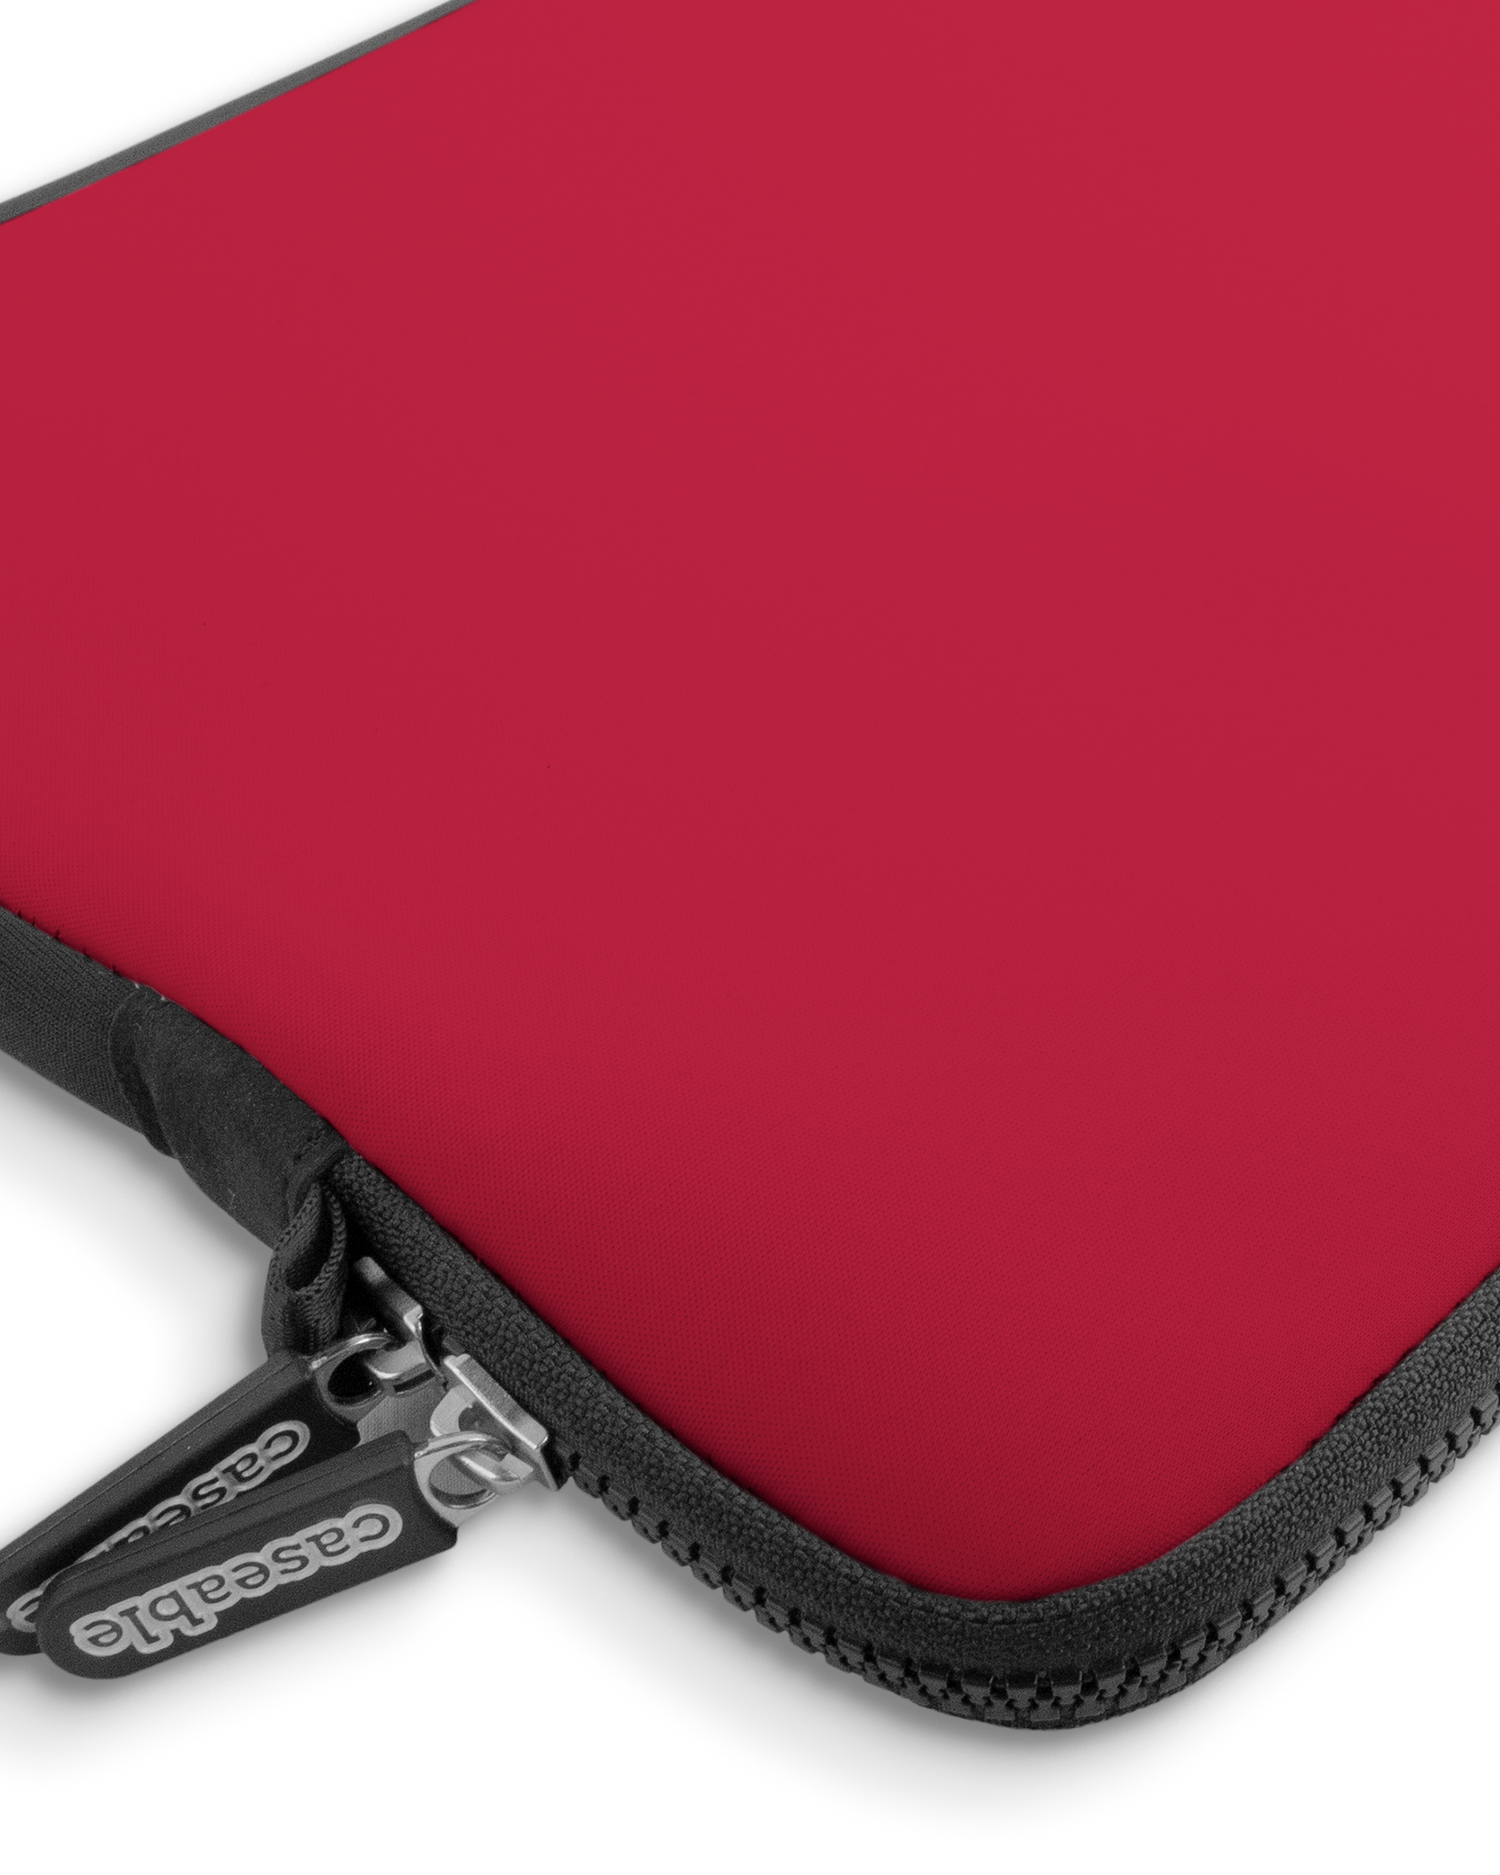 RED Premium Laptop Bag 13-14 inch with device inside